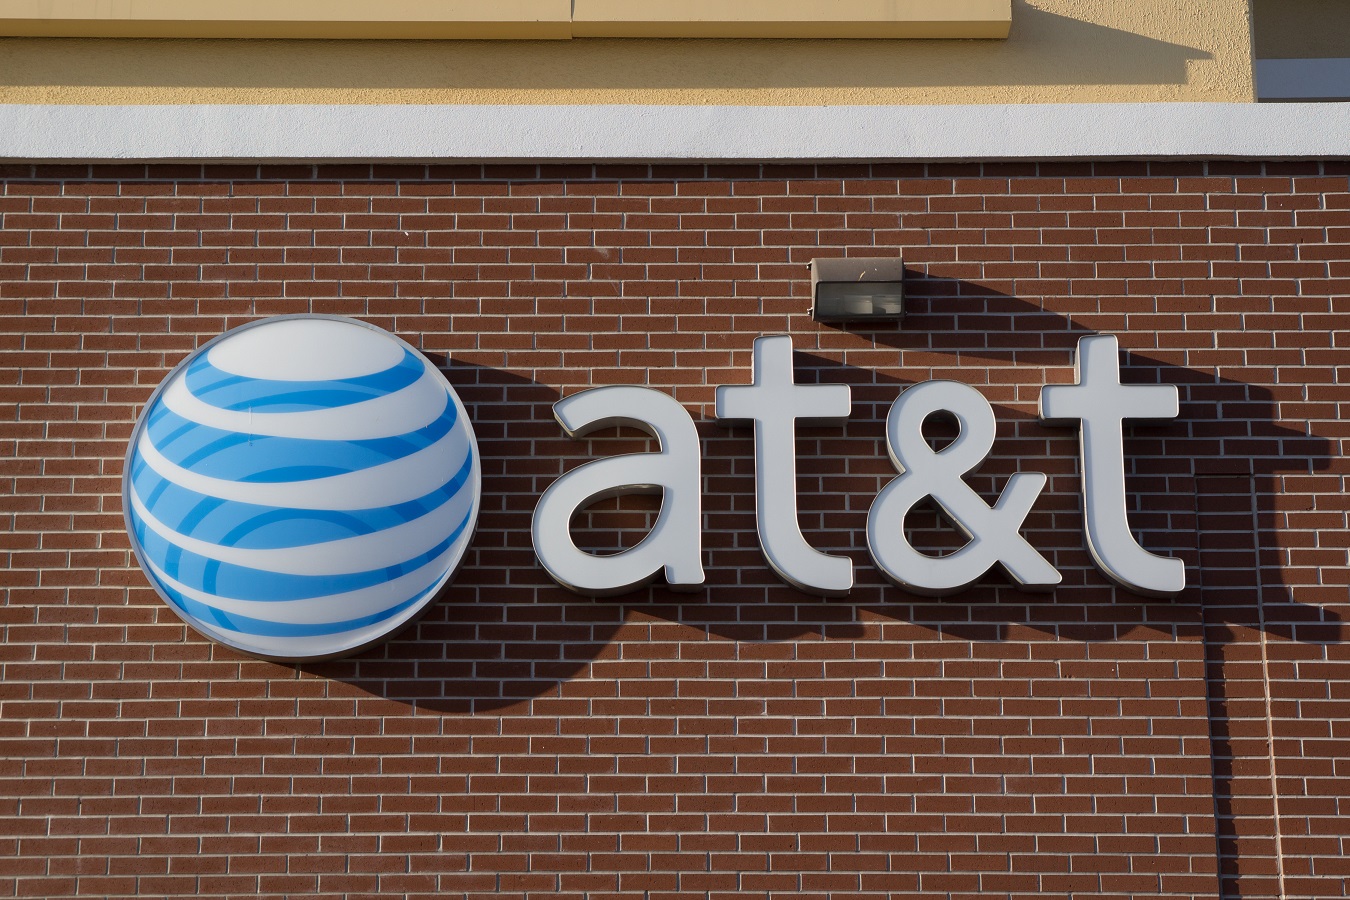 Sell AT&T as it faces challenges in growing revenues and earnings - Rich Picks Daily